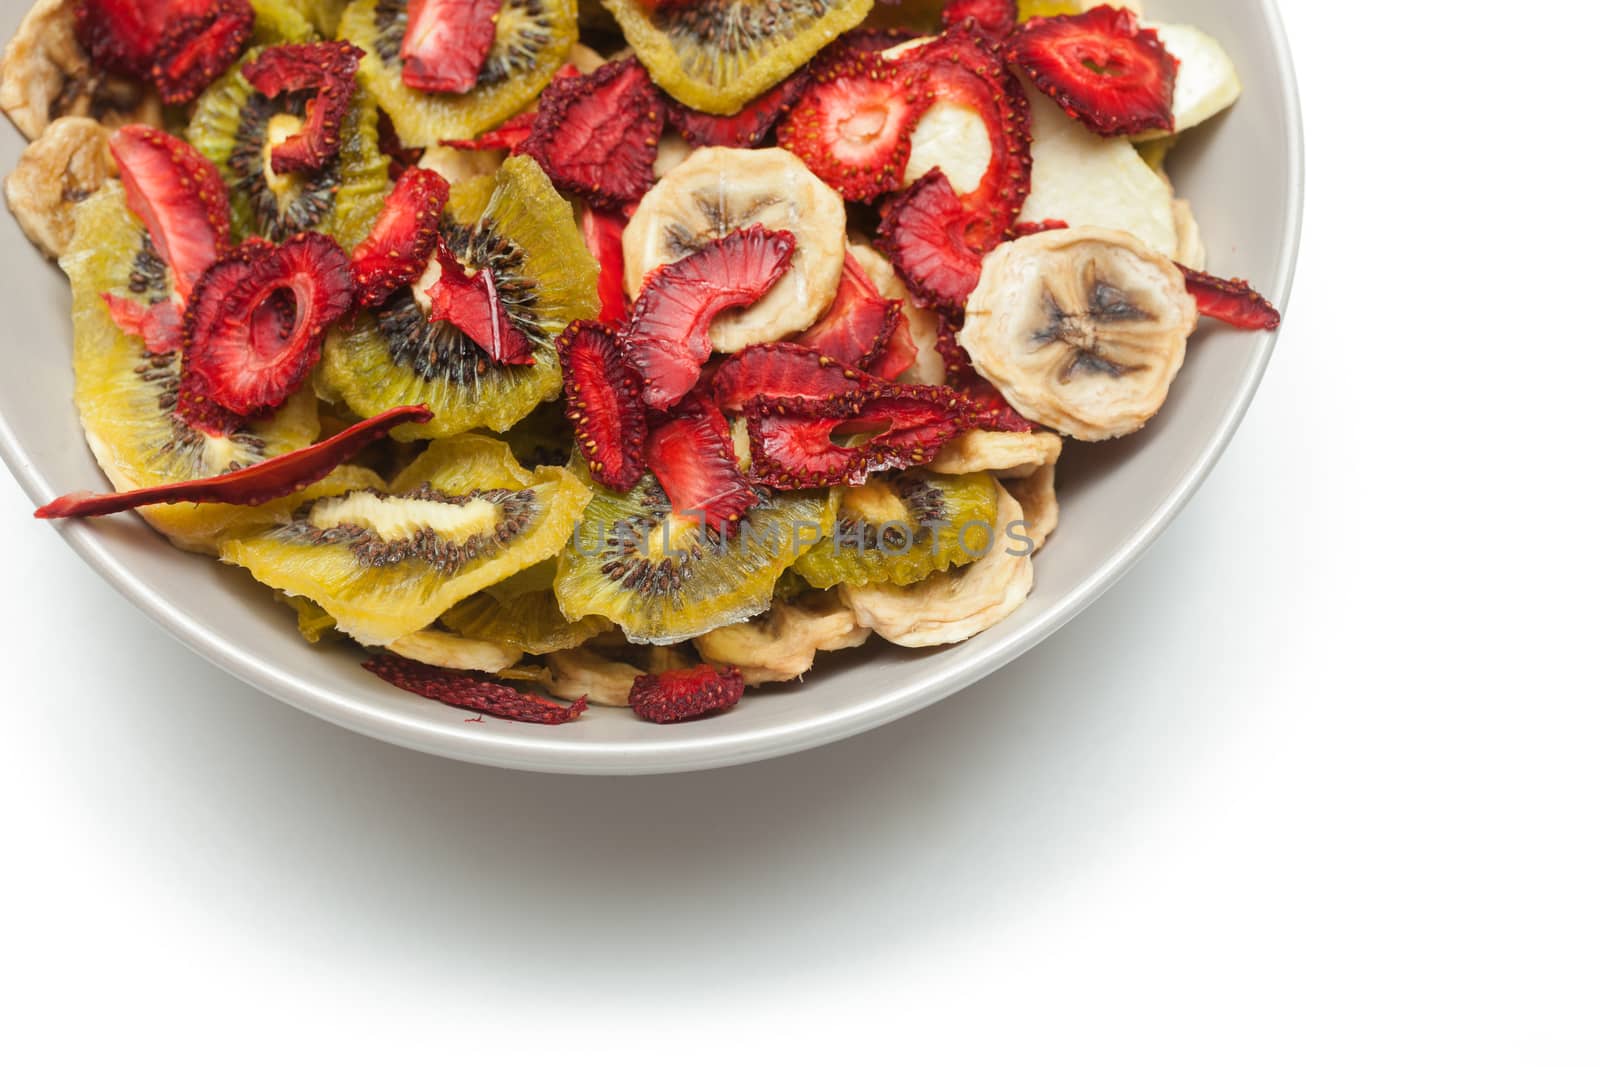 Different varieties mix of dried fruits in white plate